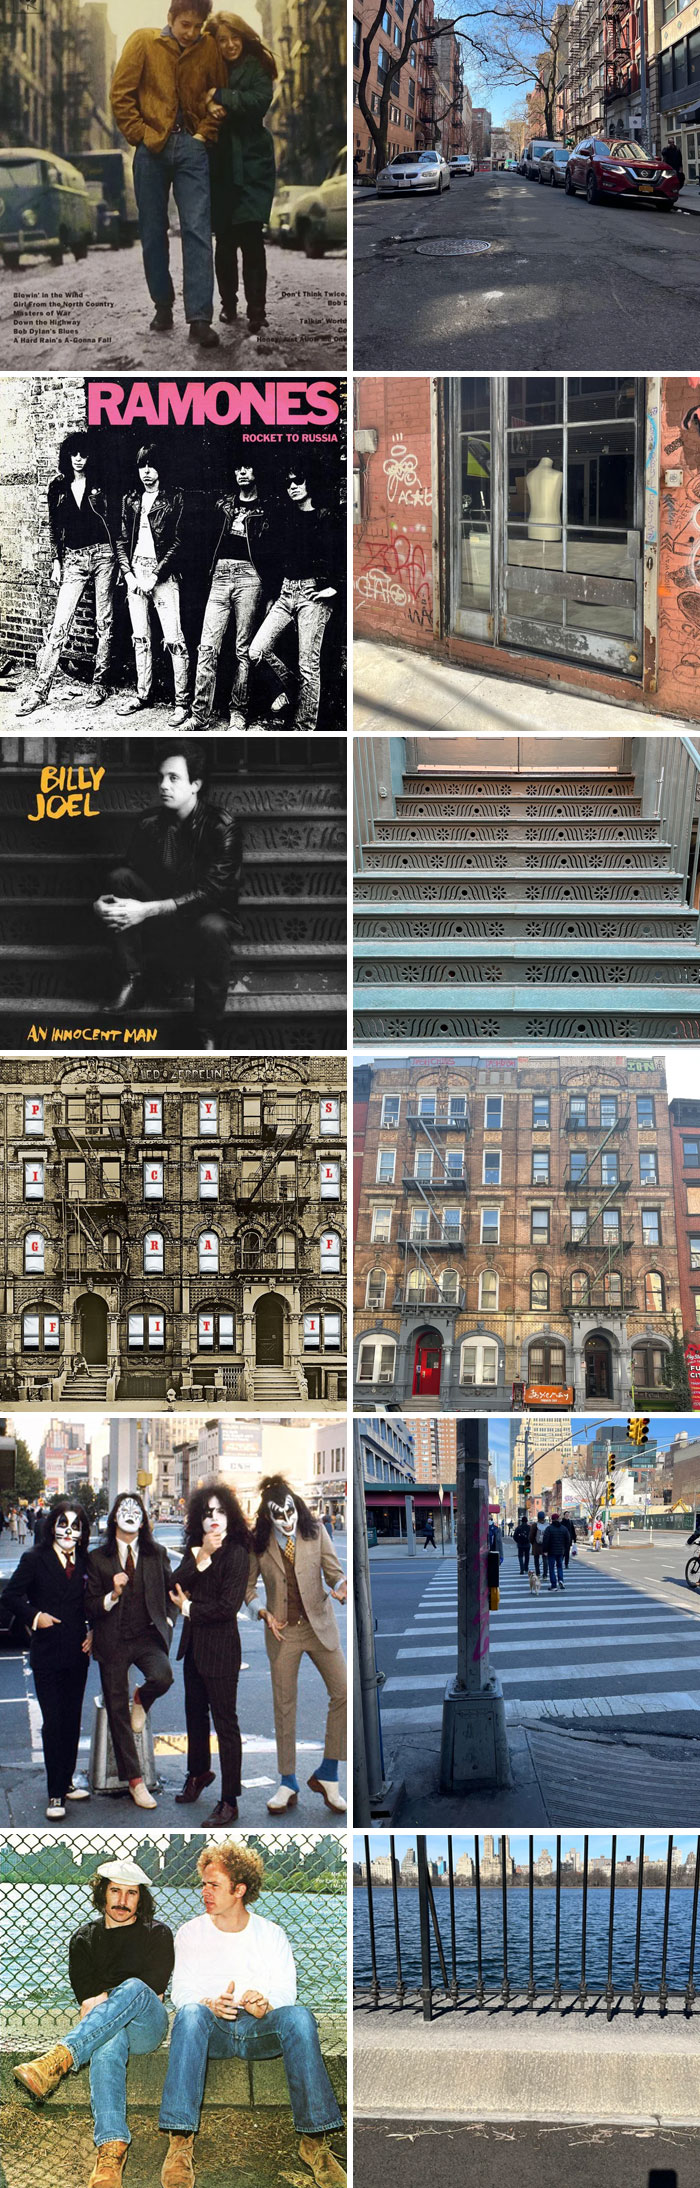 Ent To NYC And Had A Free Day So I Visited Some Iconic Album Cover Locations